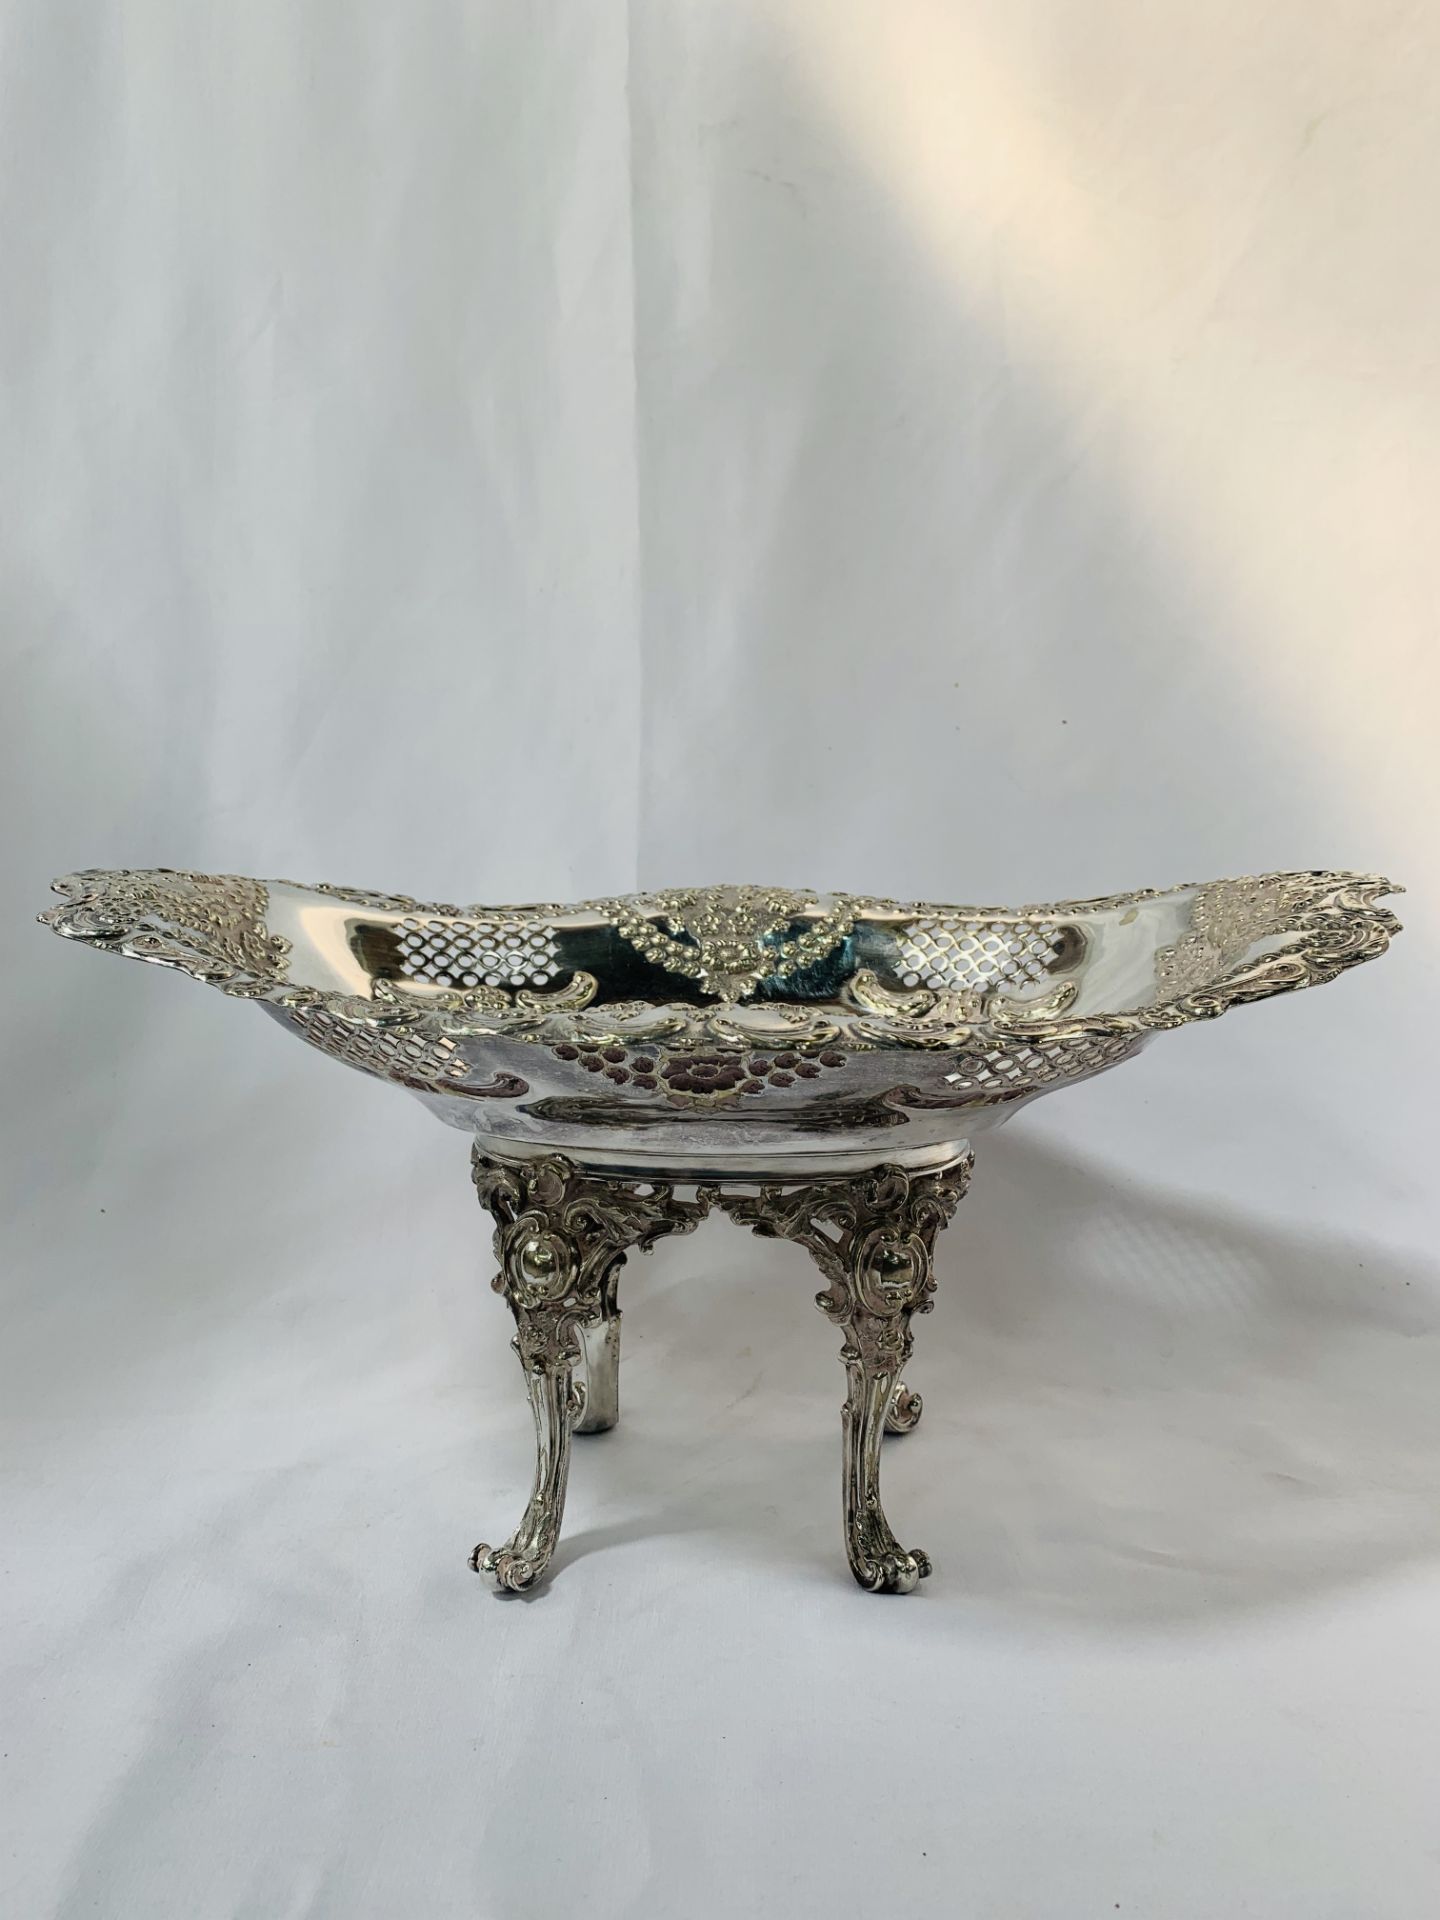 Victorian Mappin & Webb Princess plate table centrepiece Tazza with repousse design, on stand.